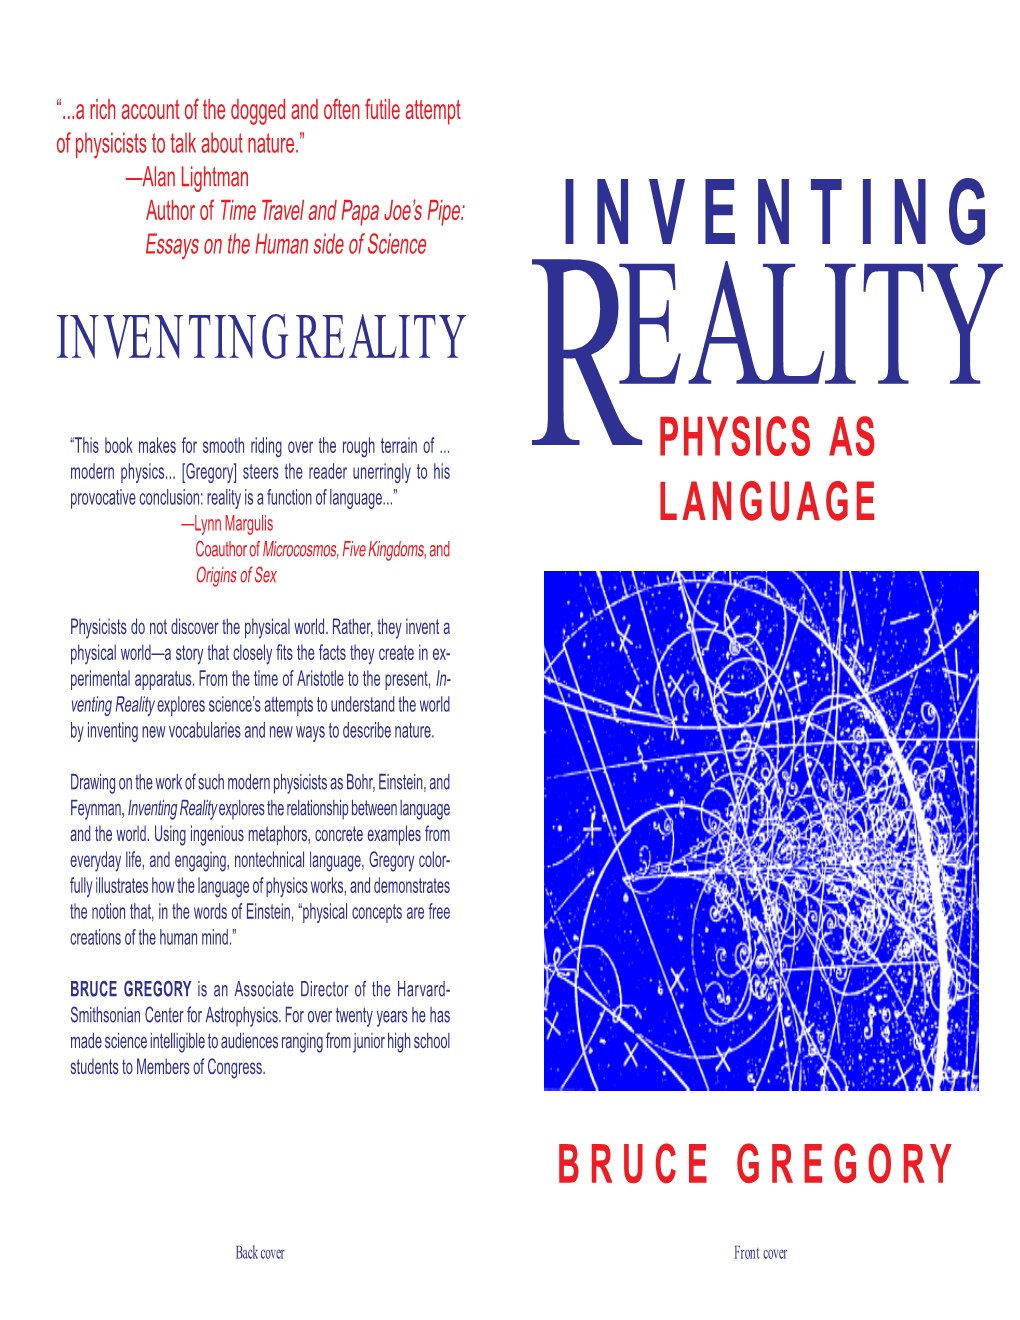 INVENTING REALITY EALITY “This Book Makes for Smooth Riding Over the Rough Terrain of